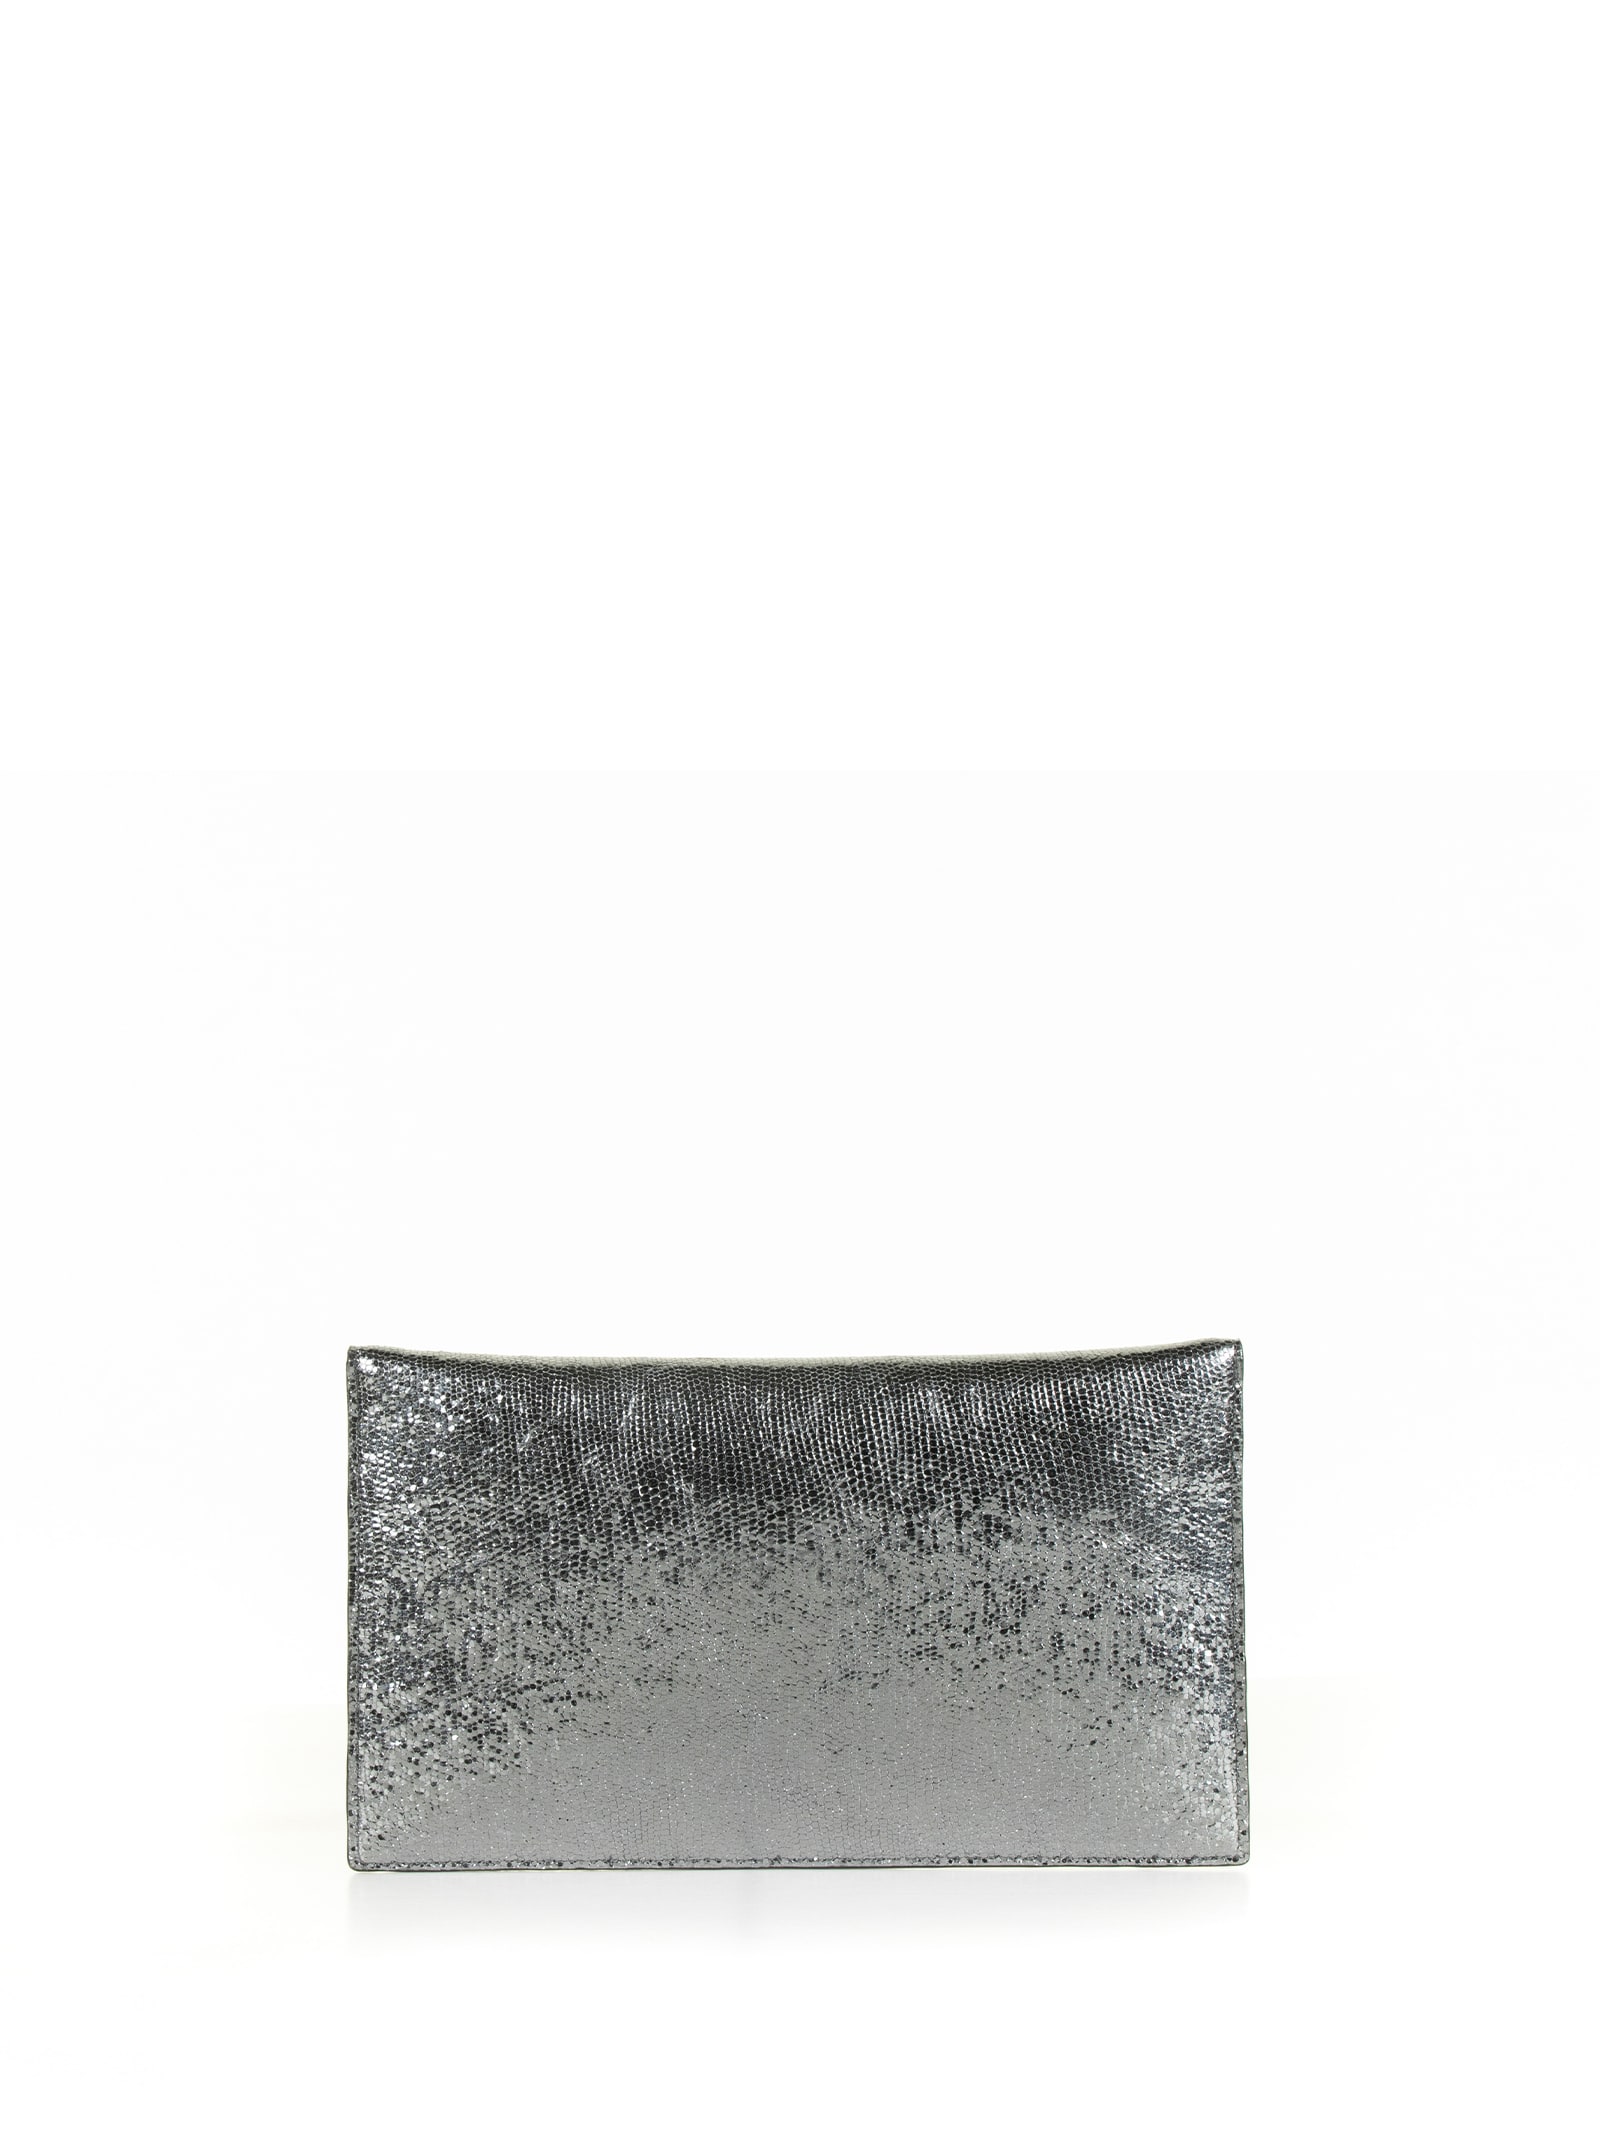 Shop Demellier Leather Clutch Bag With Shoulder Strap In Silver